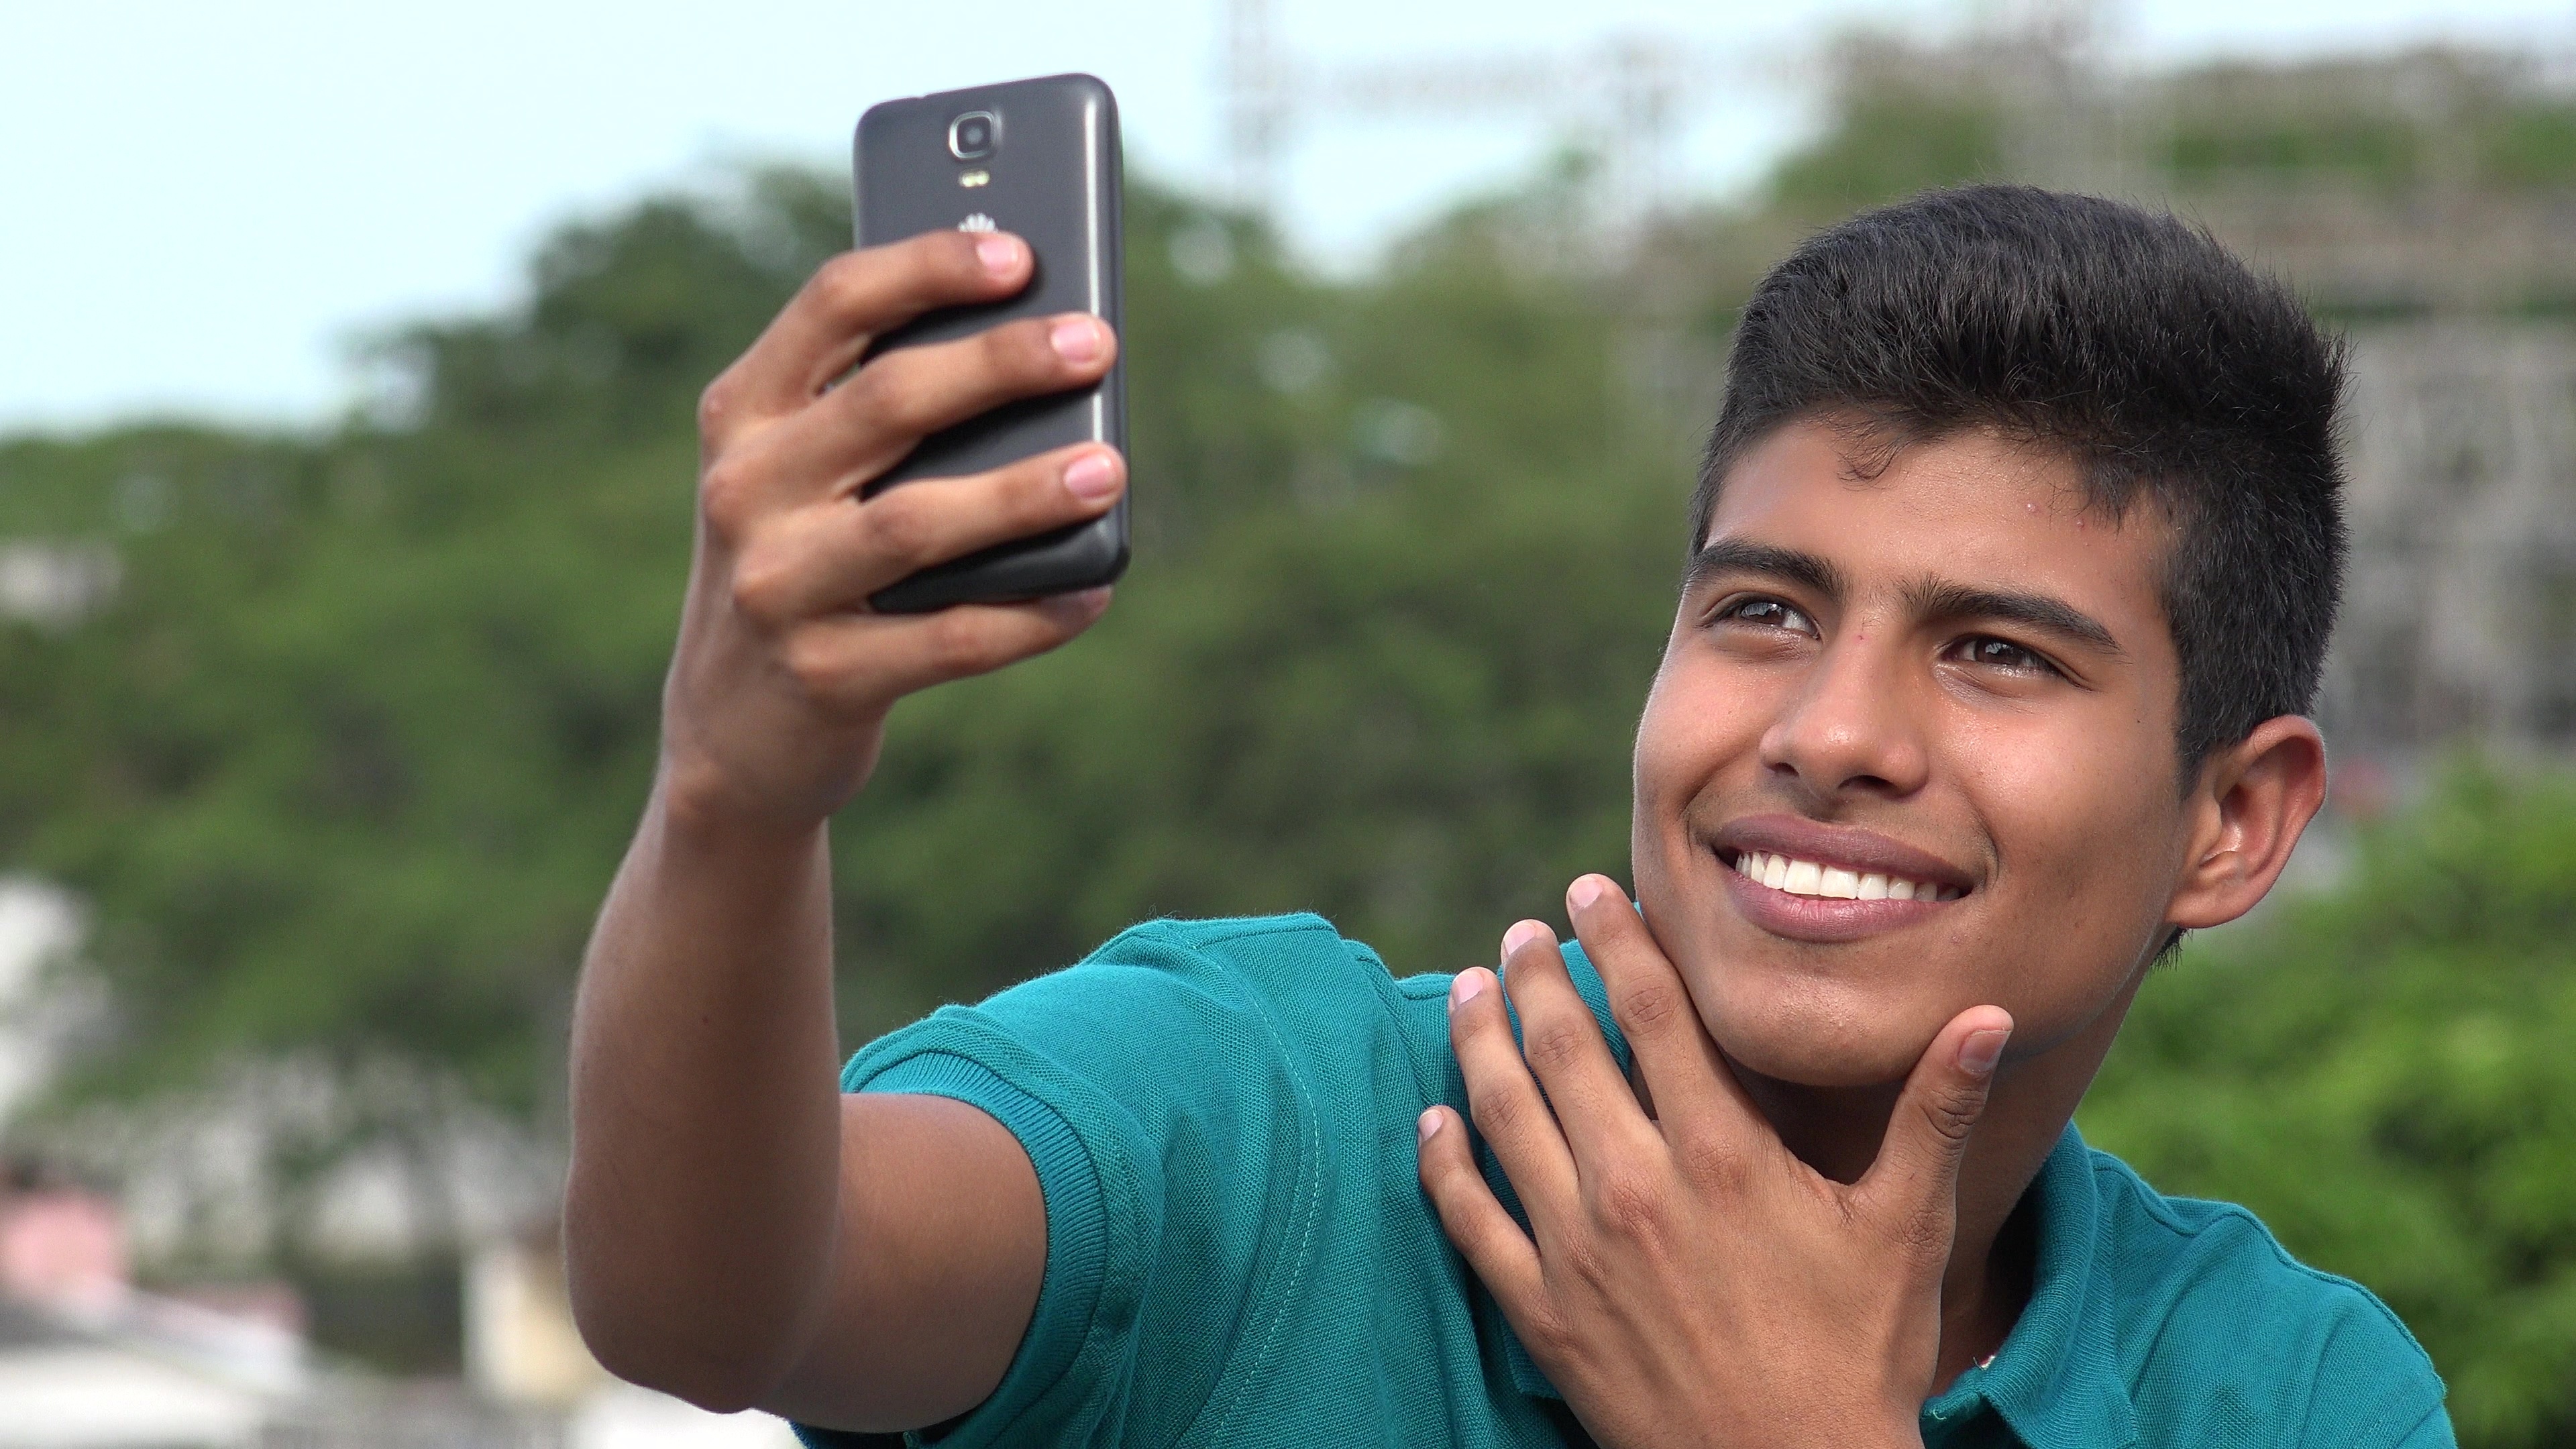 Good Looking Teen Boy Taking Selfy And Smiling